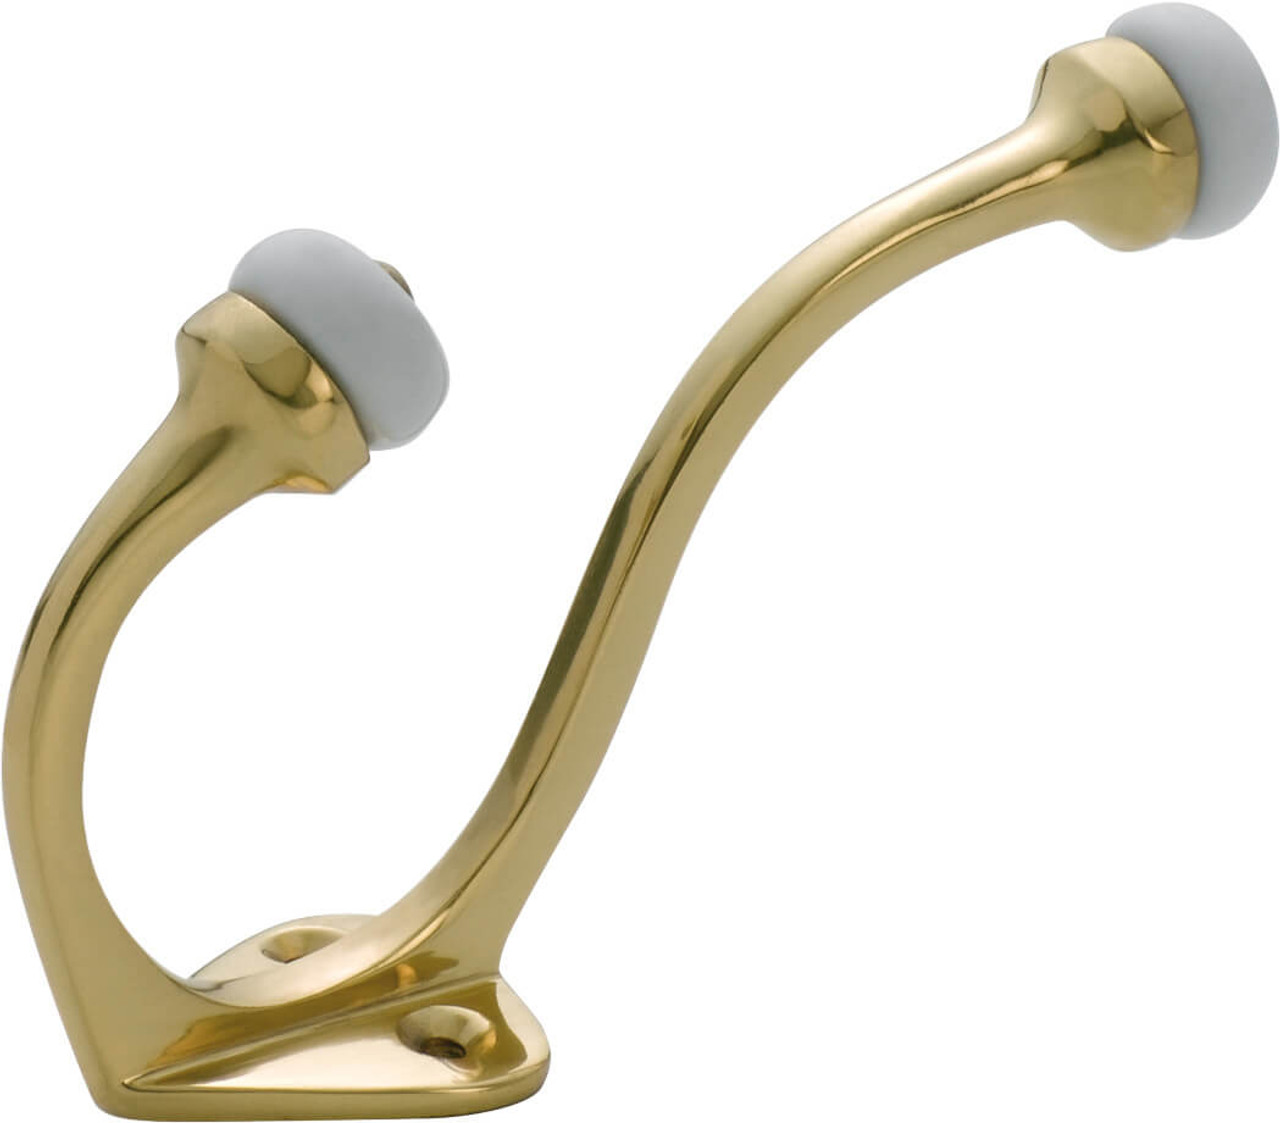 Tradco Victorian Coat Hook with White Porcelain Tip, 115 x 75mm